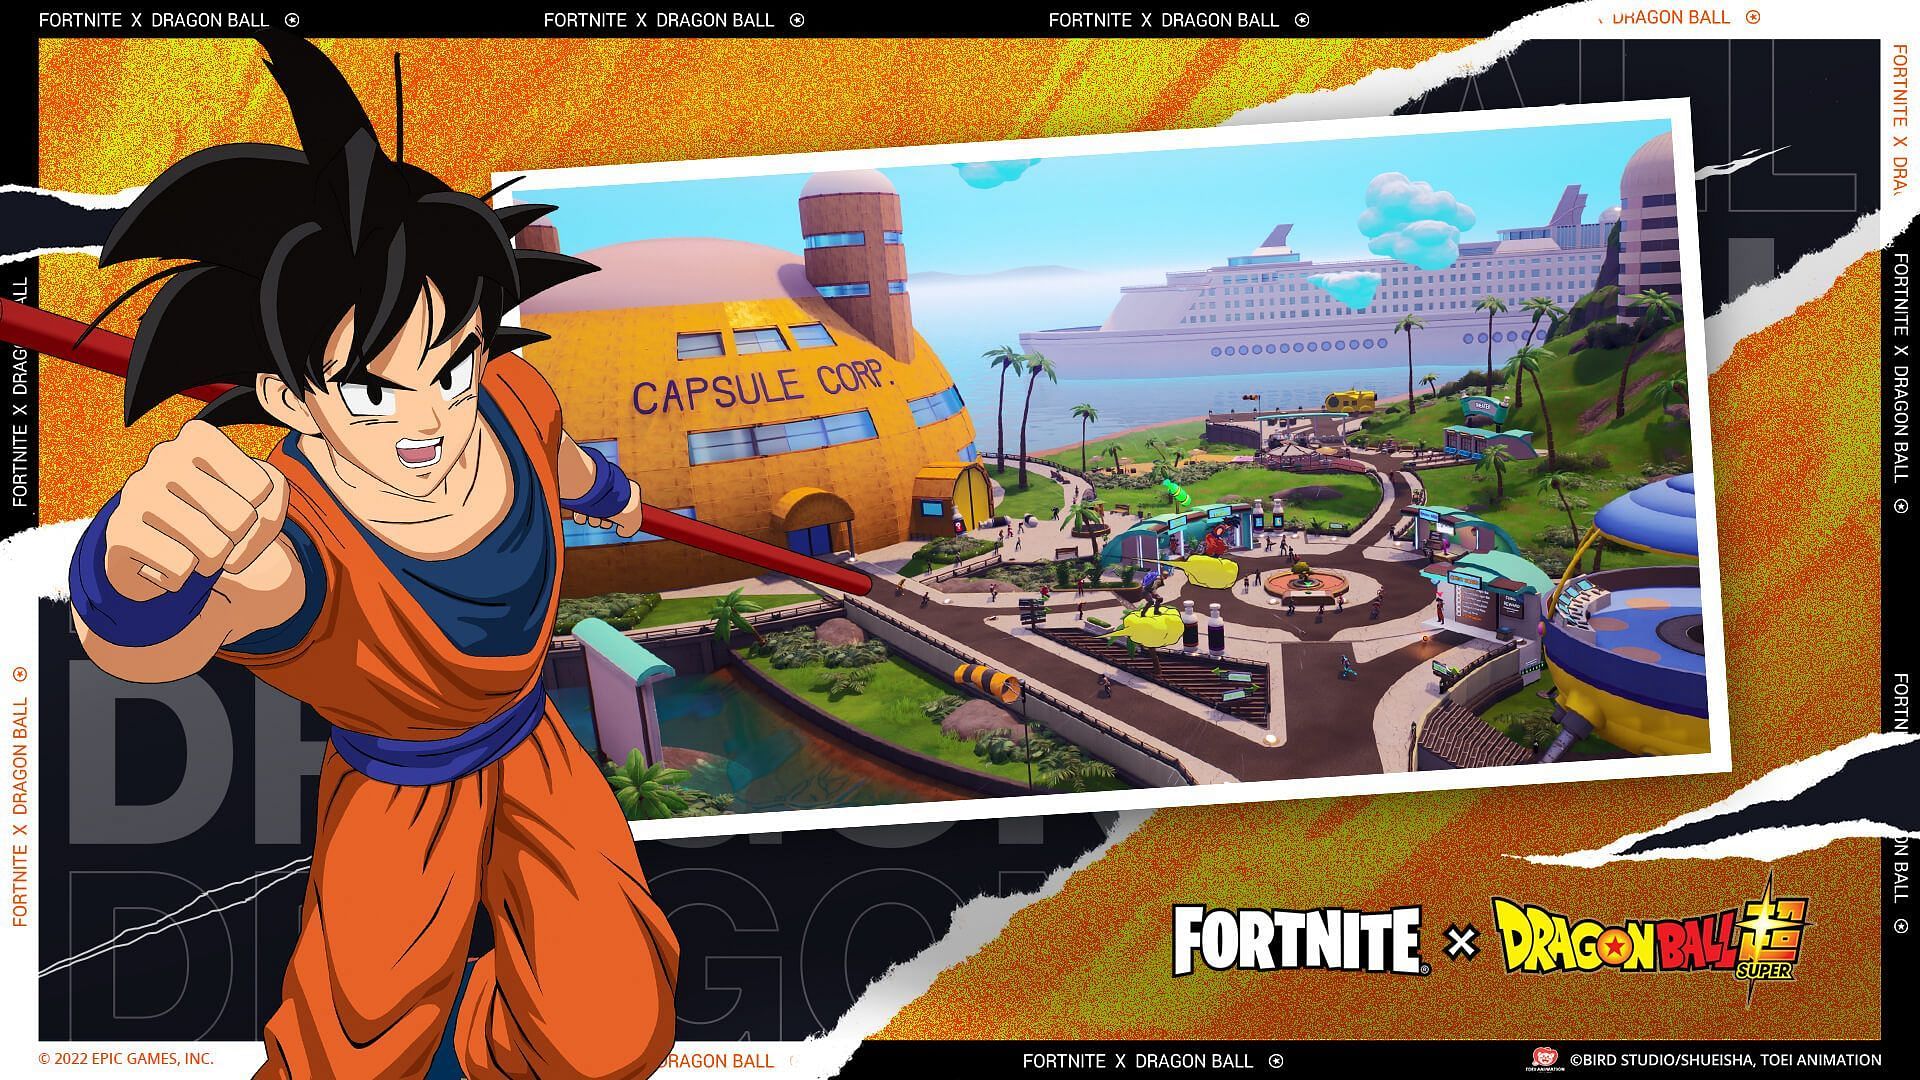 Fortnite players can watch Dragon Ball Super episodes in-game (Image via Epic Games)